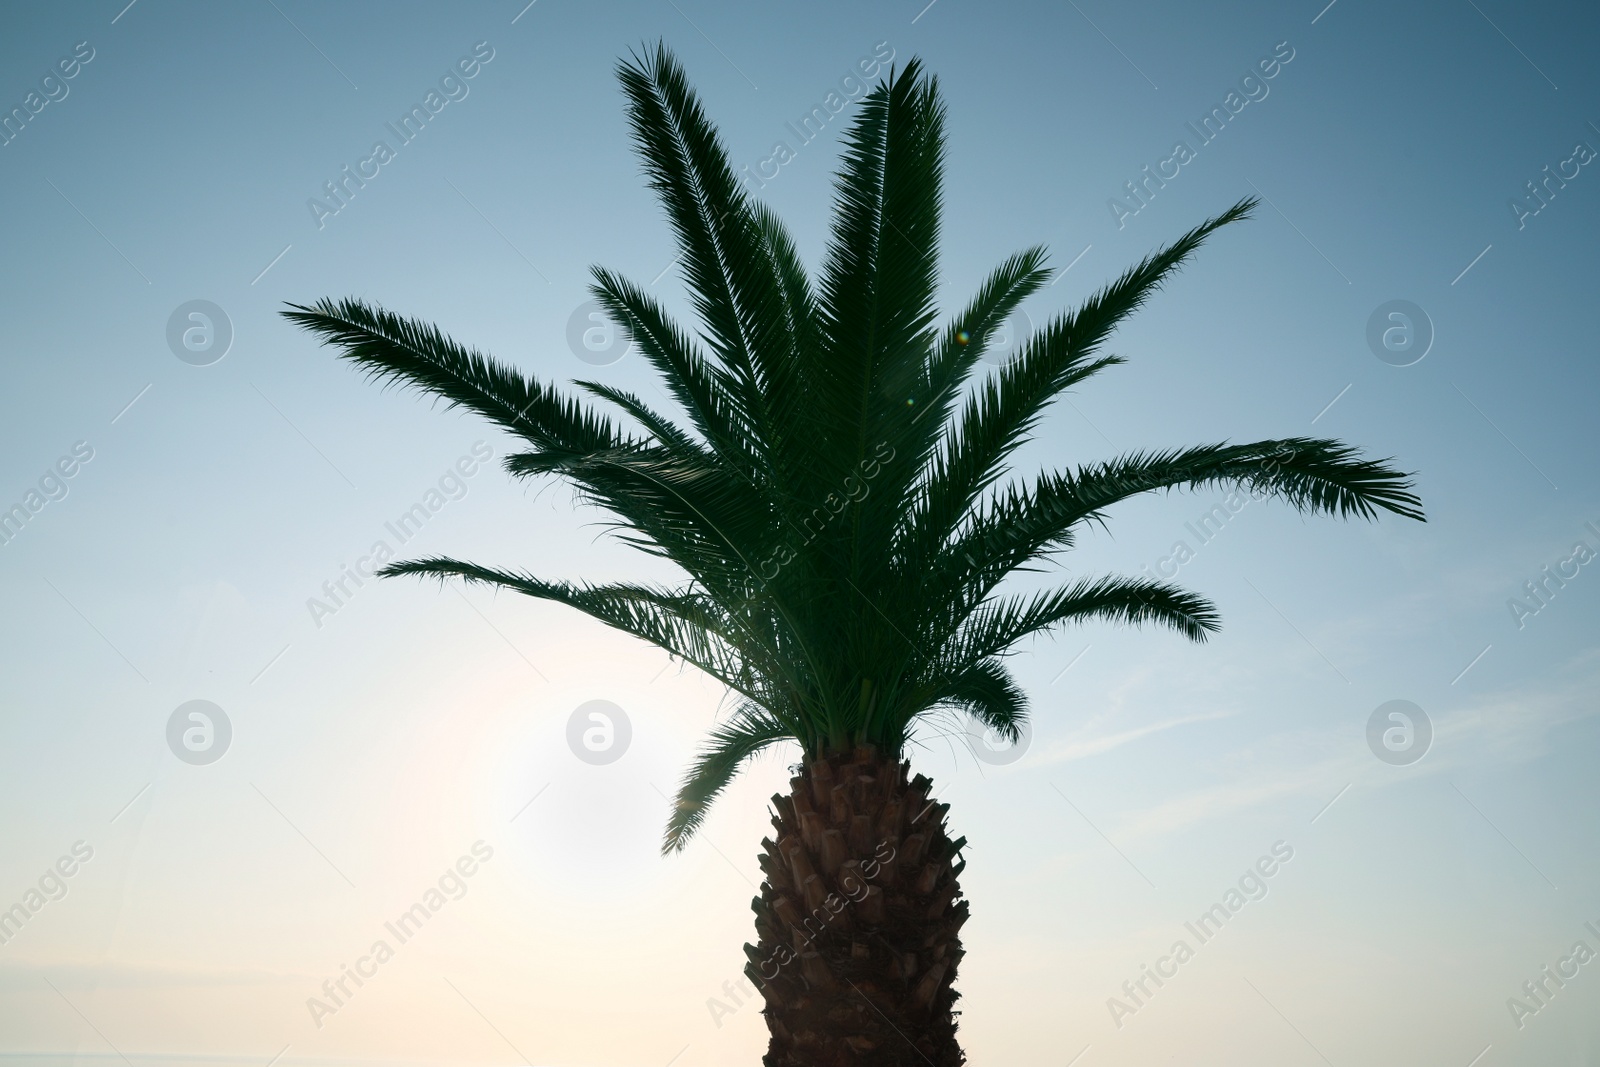 Photo of Beautiful palm tree with green leaves against blue sky, low angle view. Tropical plant